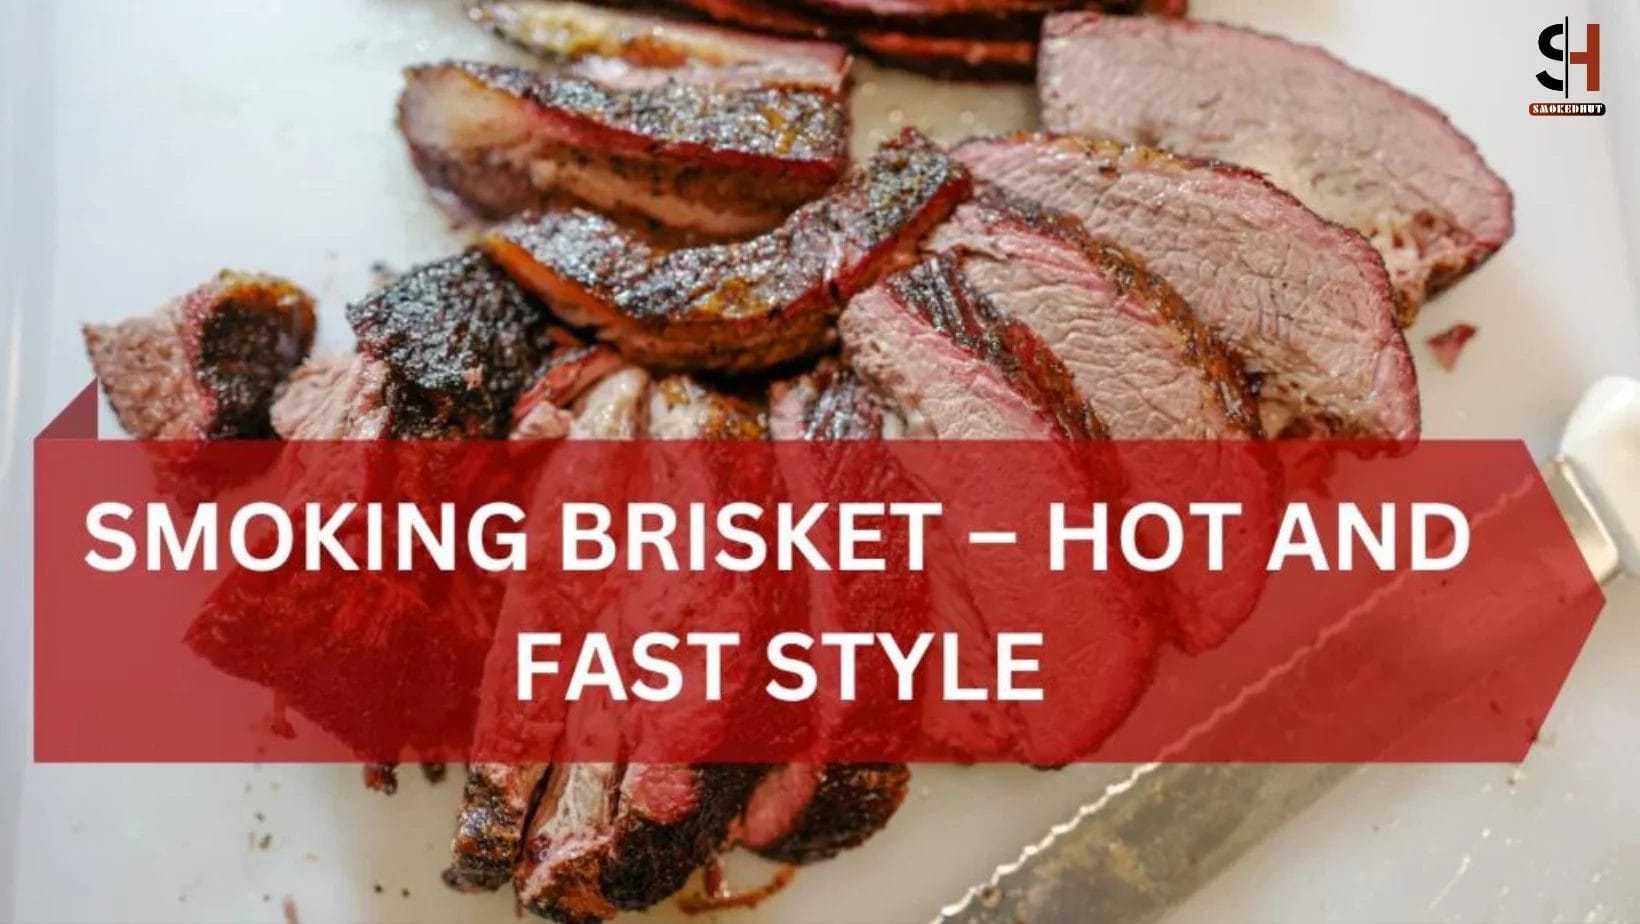 How to Smoke Hot and Fast Brisket - Hot & Fast Style